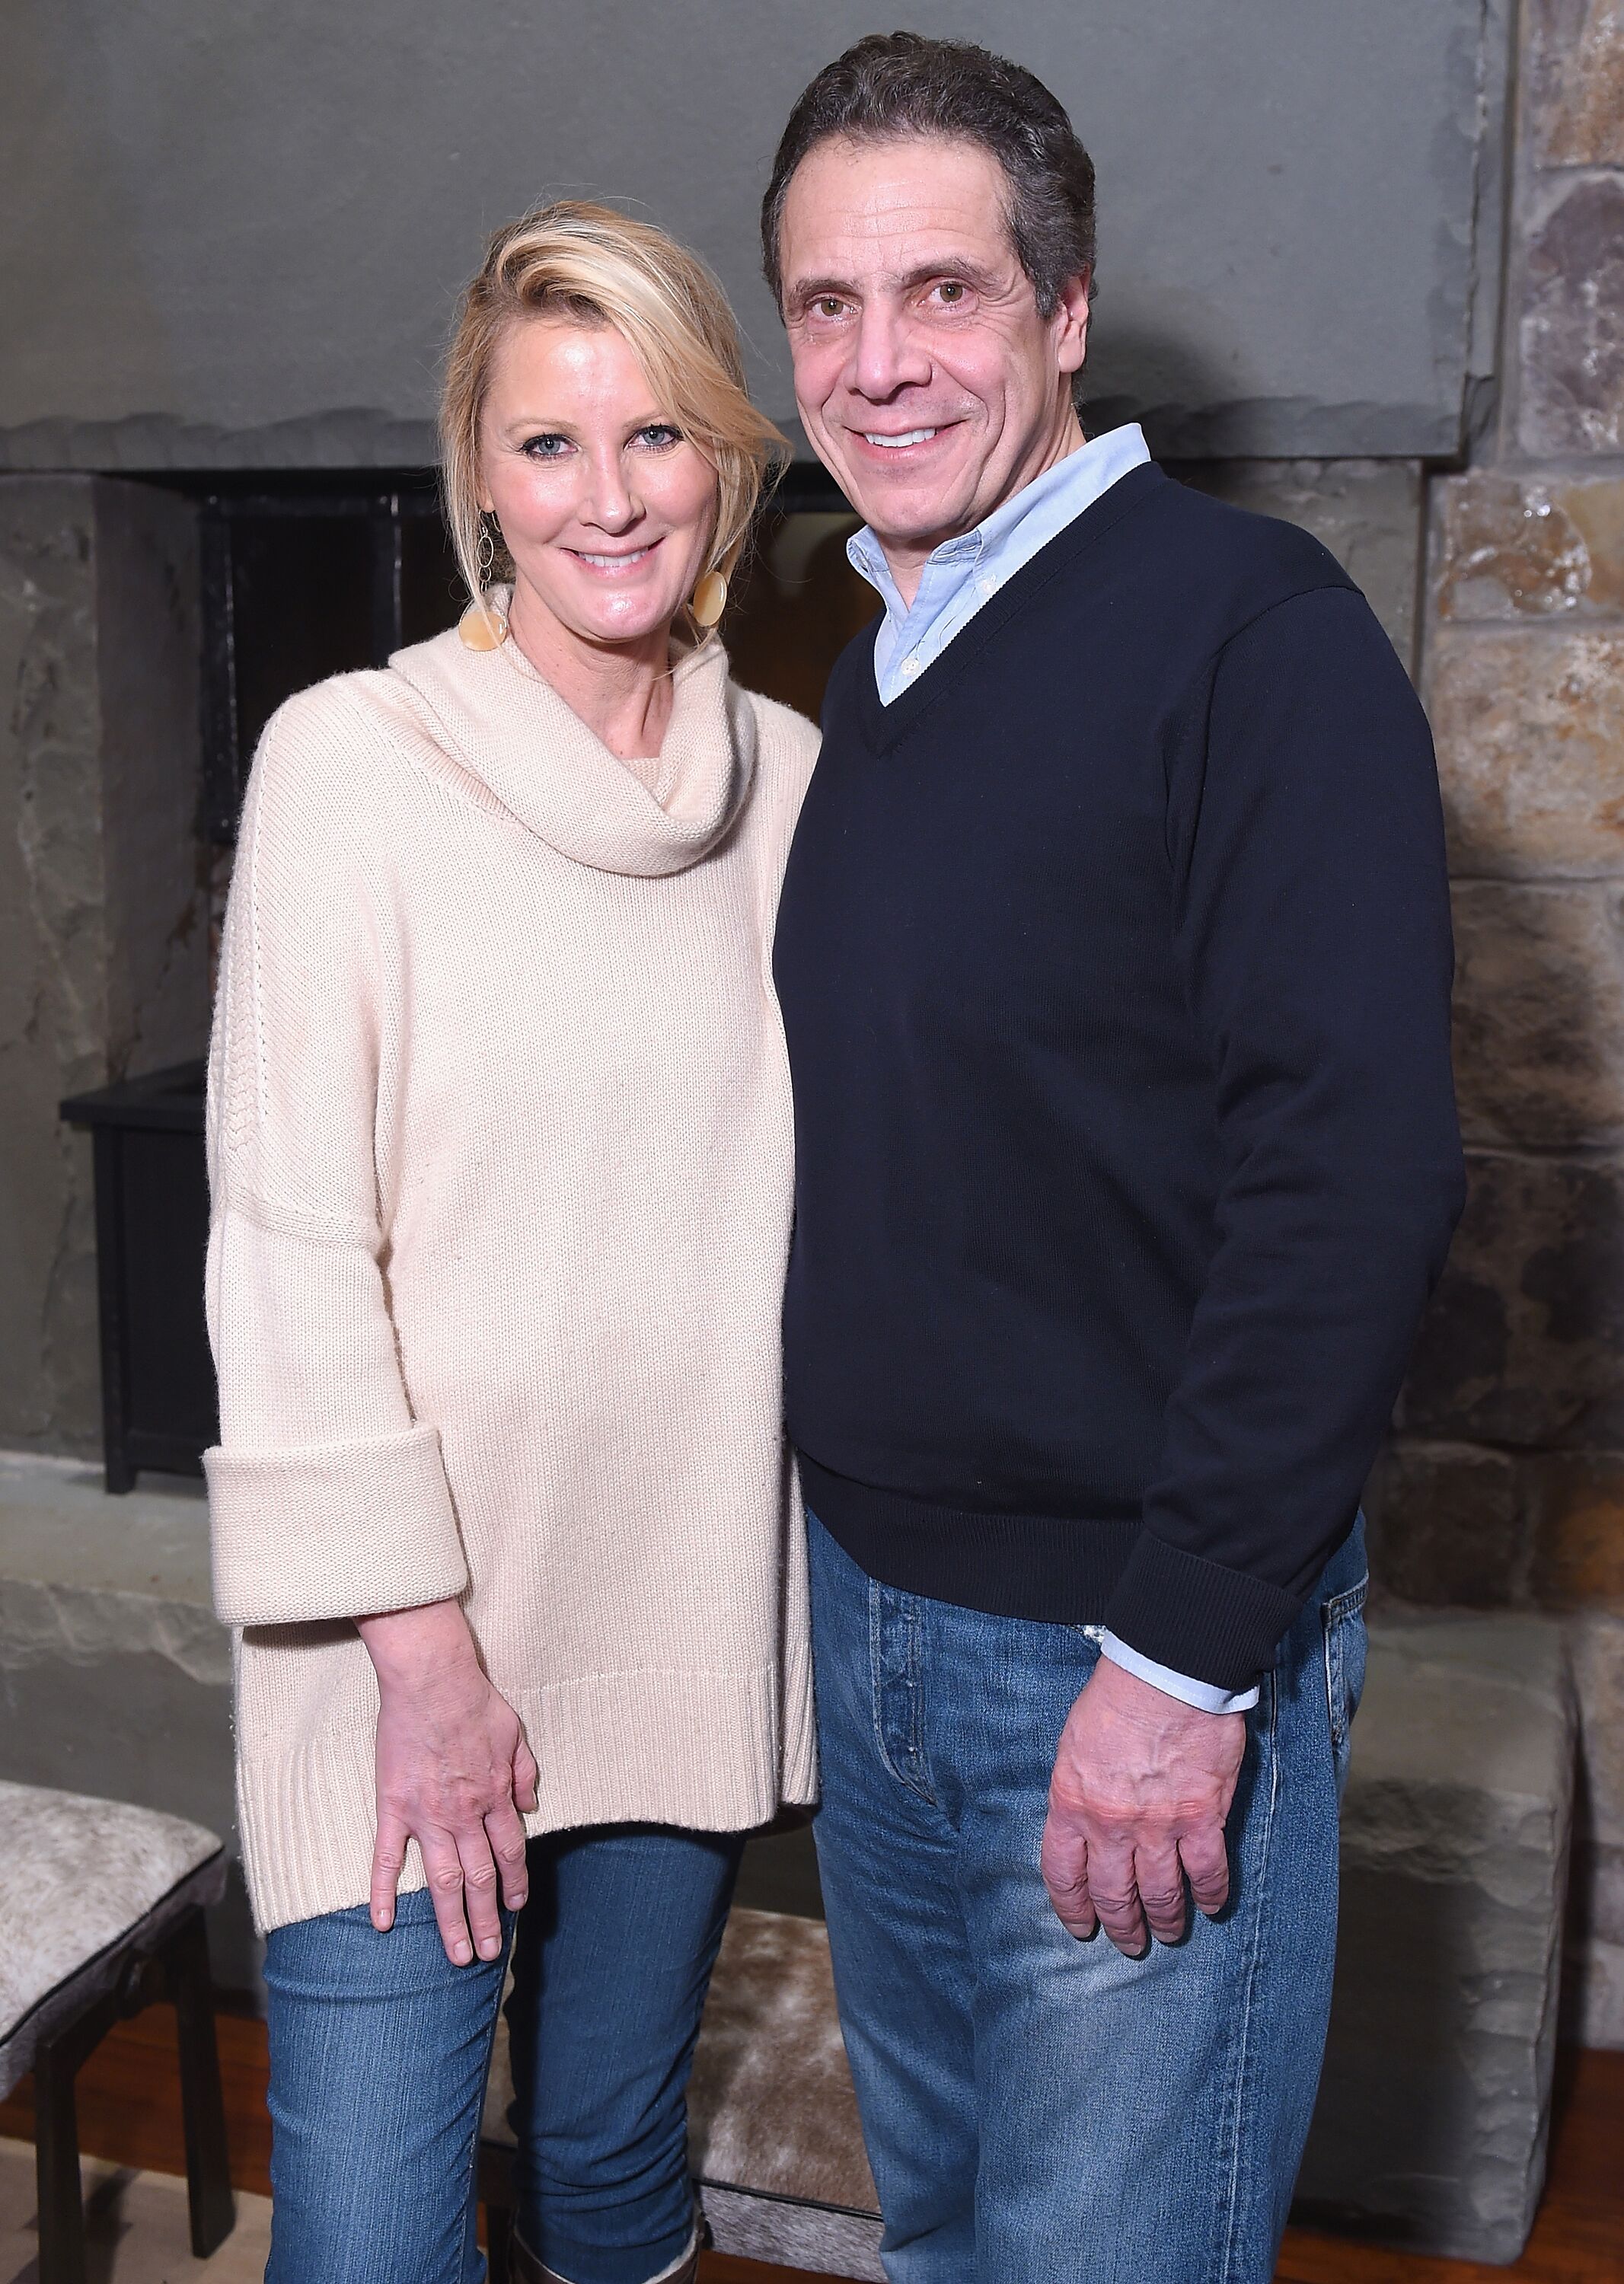 Sandra Lee and Governer Andrew Cuomo attend the "RX: Early Detection A Cancer Journey" at the Sundance Film Festival in 2018 | Source: Getty Images